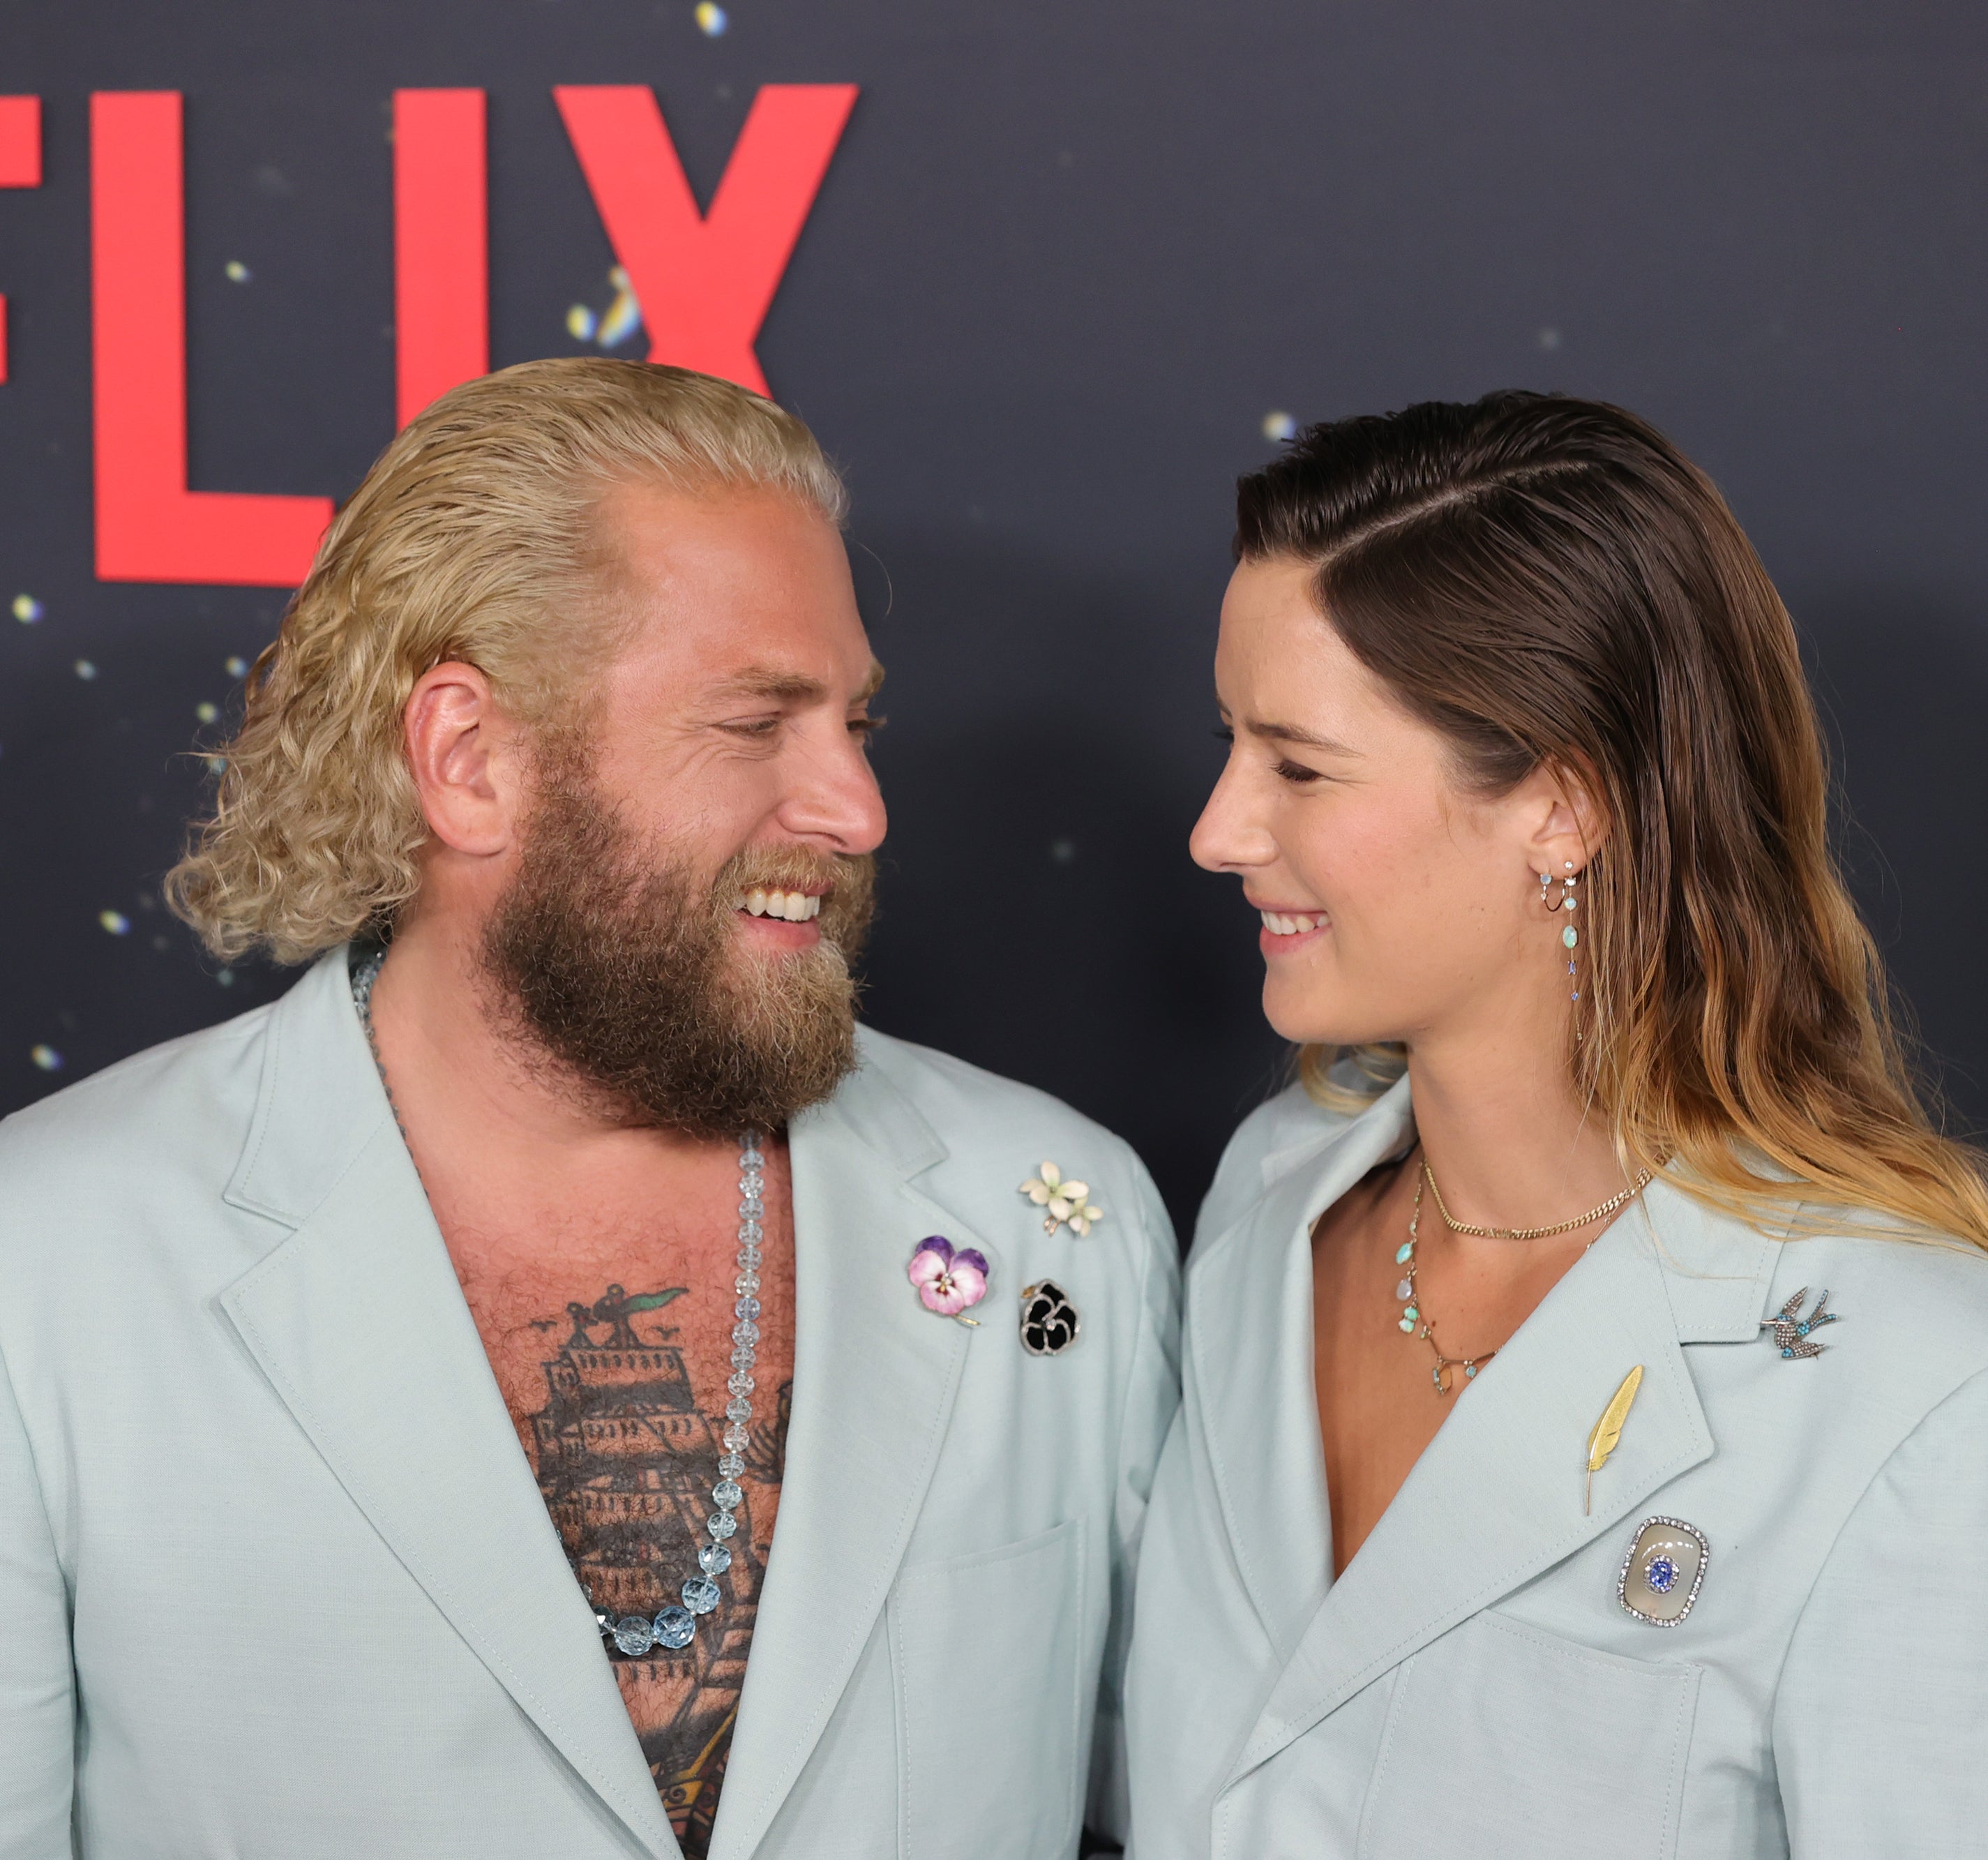 Close-up of Jonah and Sarah at a press event wearing matching suits and smiling at each other